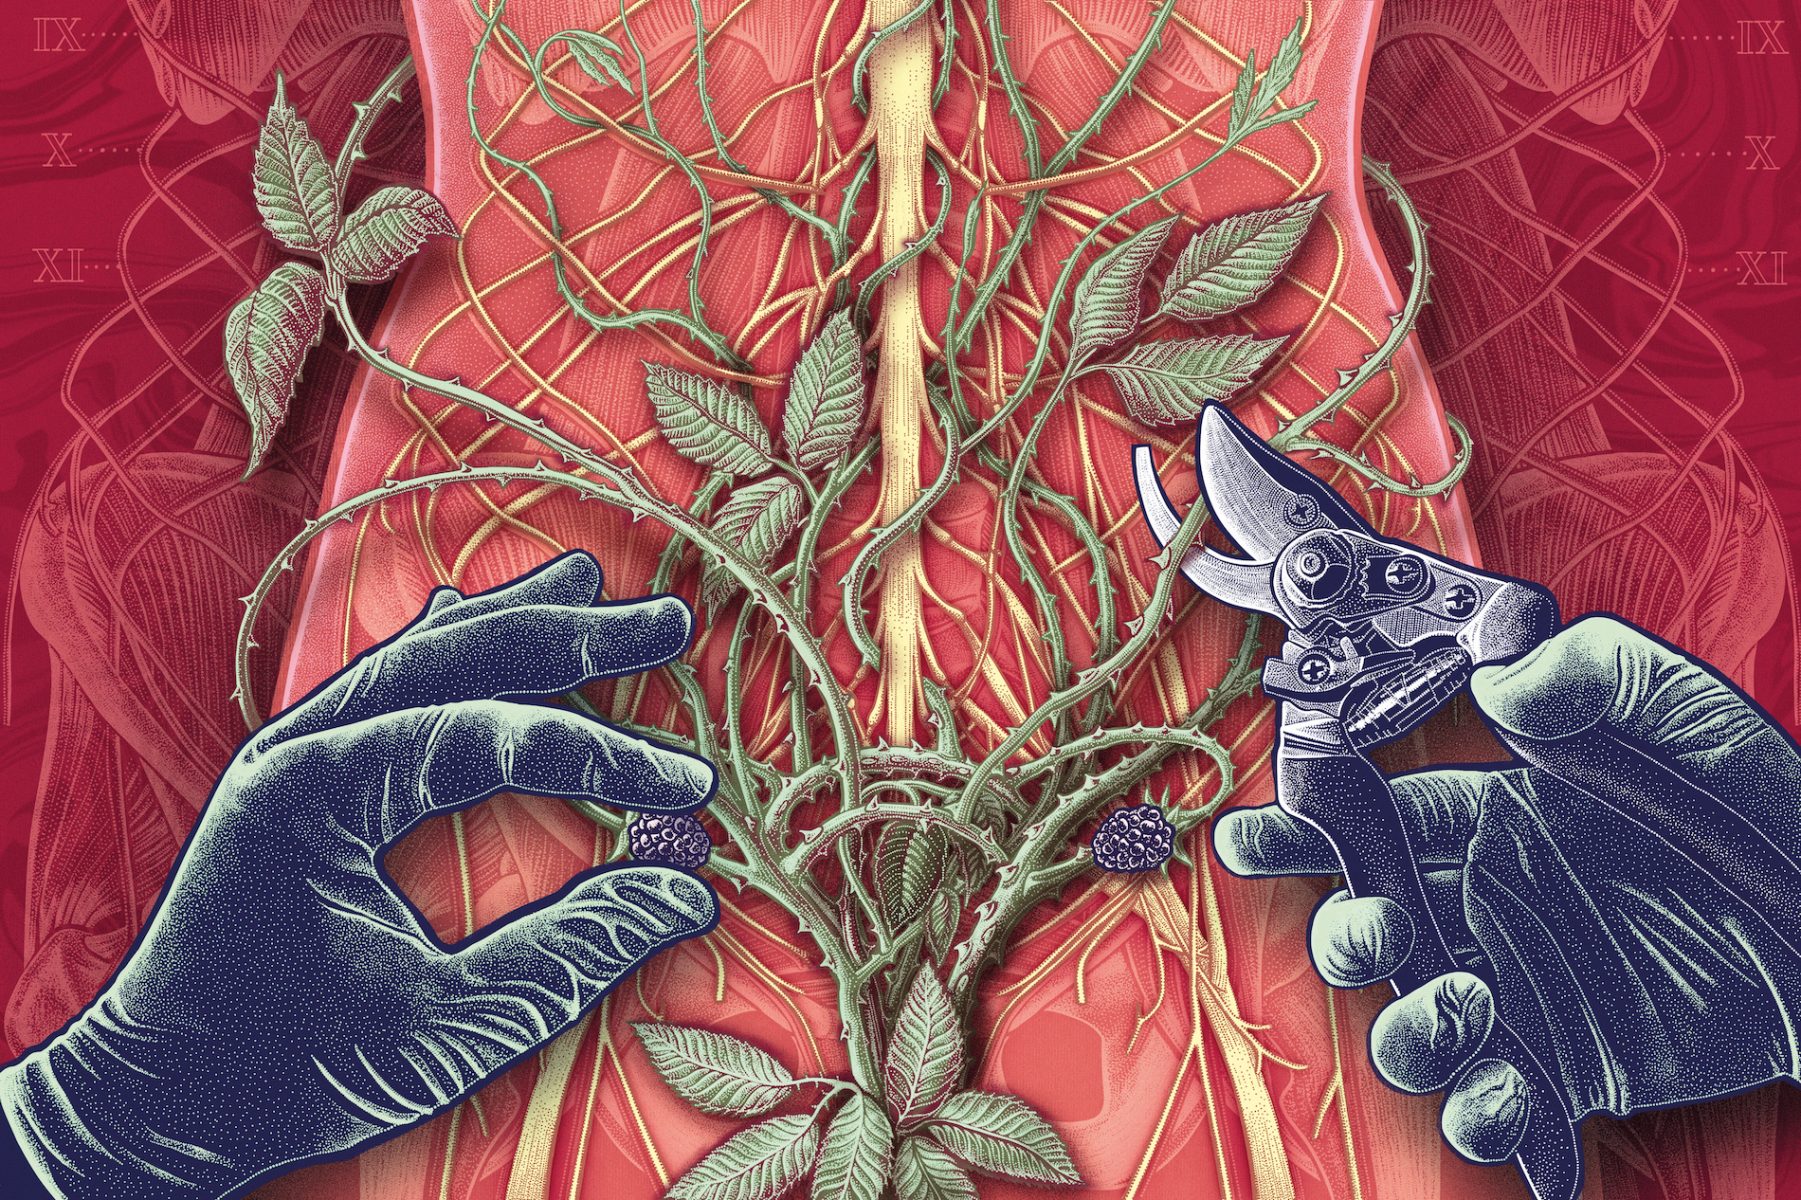 Illustration by Jennifer N. R. Smith / WonderTheory, showing thorned brambles growing up the nervous system of a person's torso, the brambles at the bottom of the piece are growing in the shape of a uterus, and there are blackberries where the ovaries should be. A blue, gloved hand is coming in from the left to pluck at the ovary blackberry, and another gloved hand coming in from the right is using gardening secateurs to cut one of the branches.